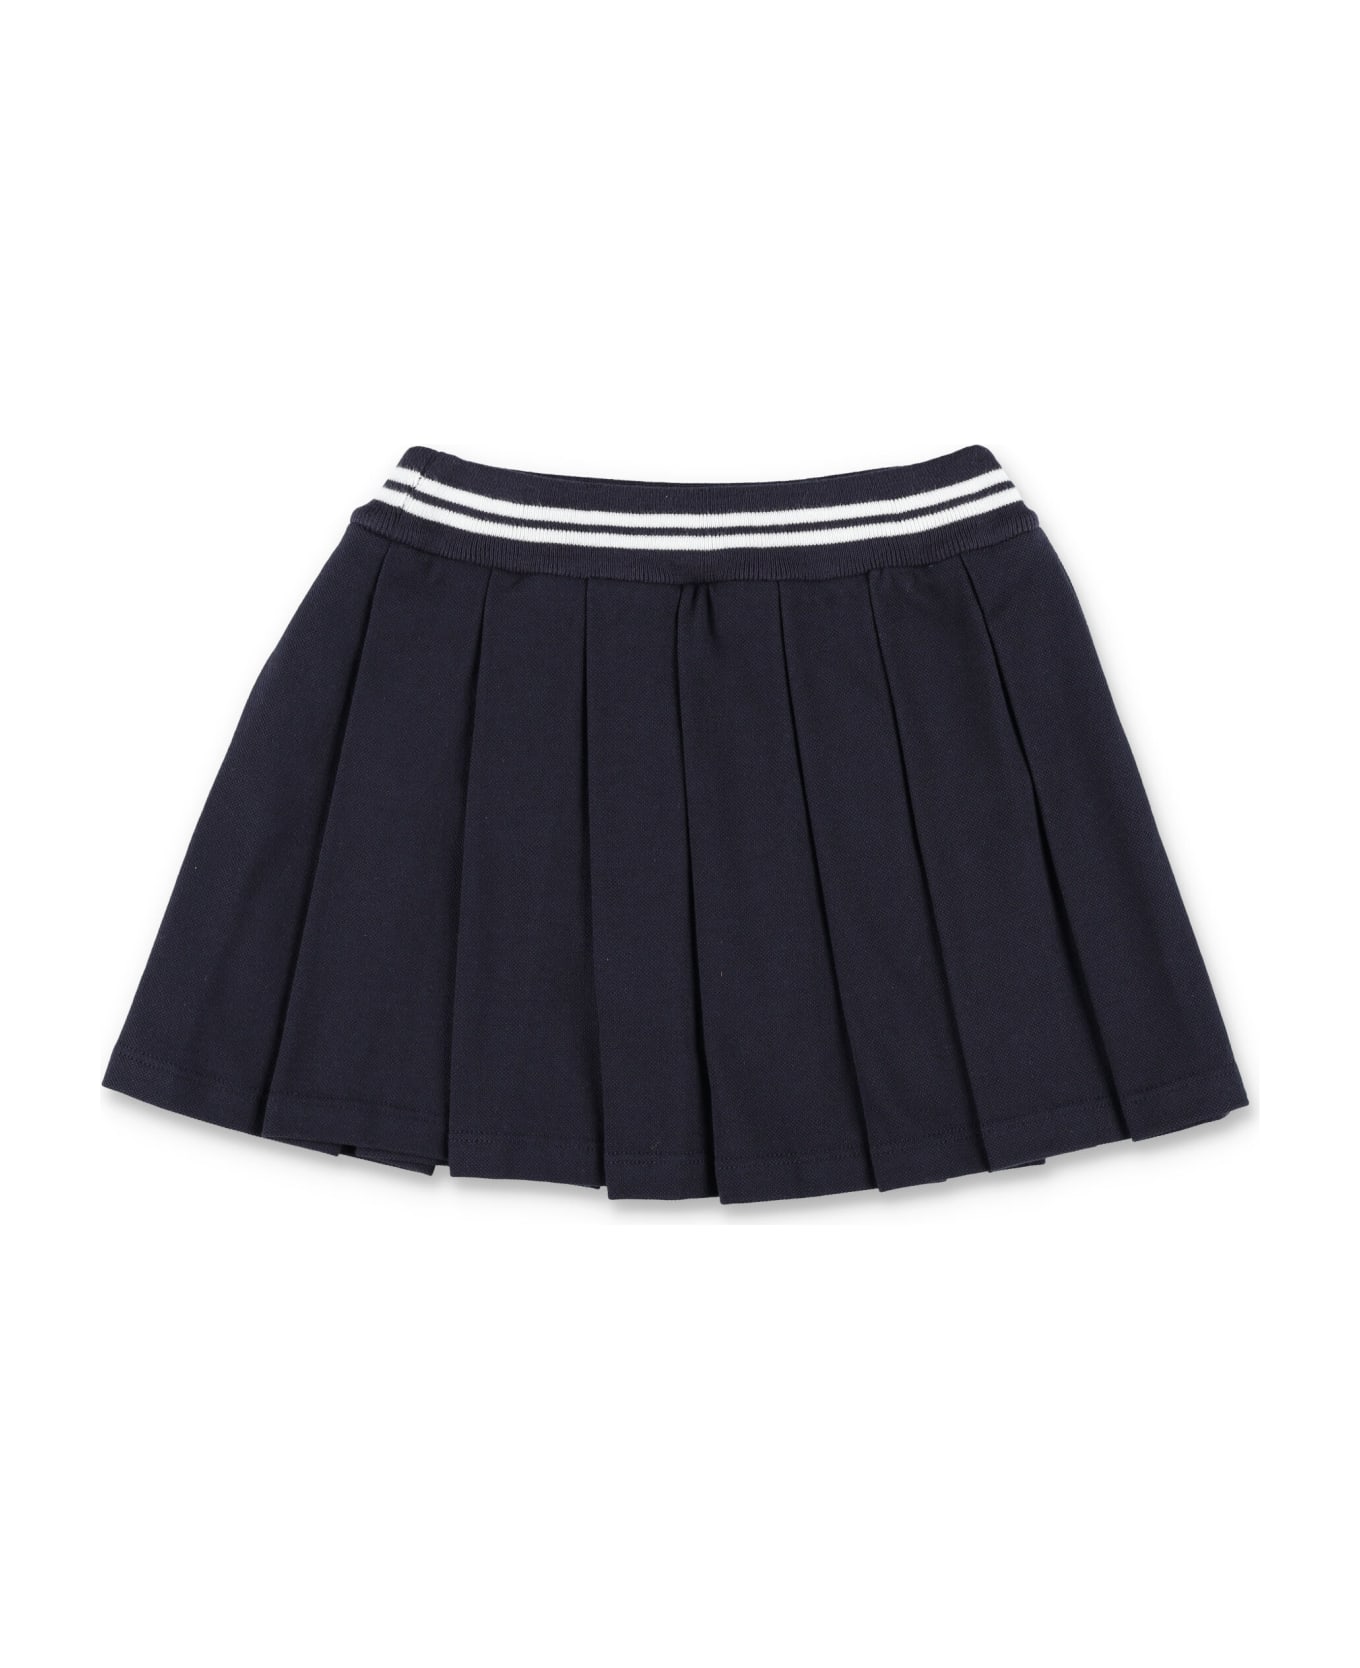 Moncler Pleated Skirt - BLUE ボトムス